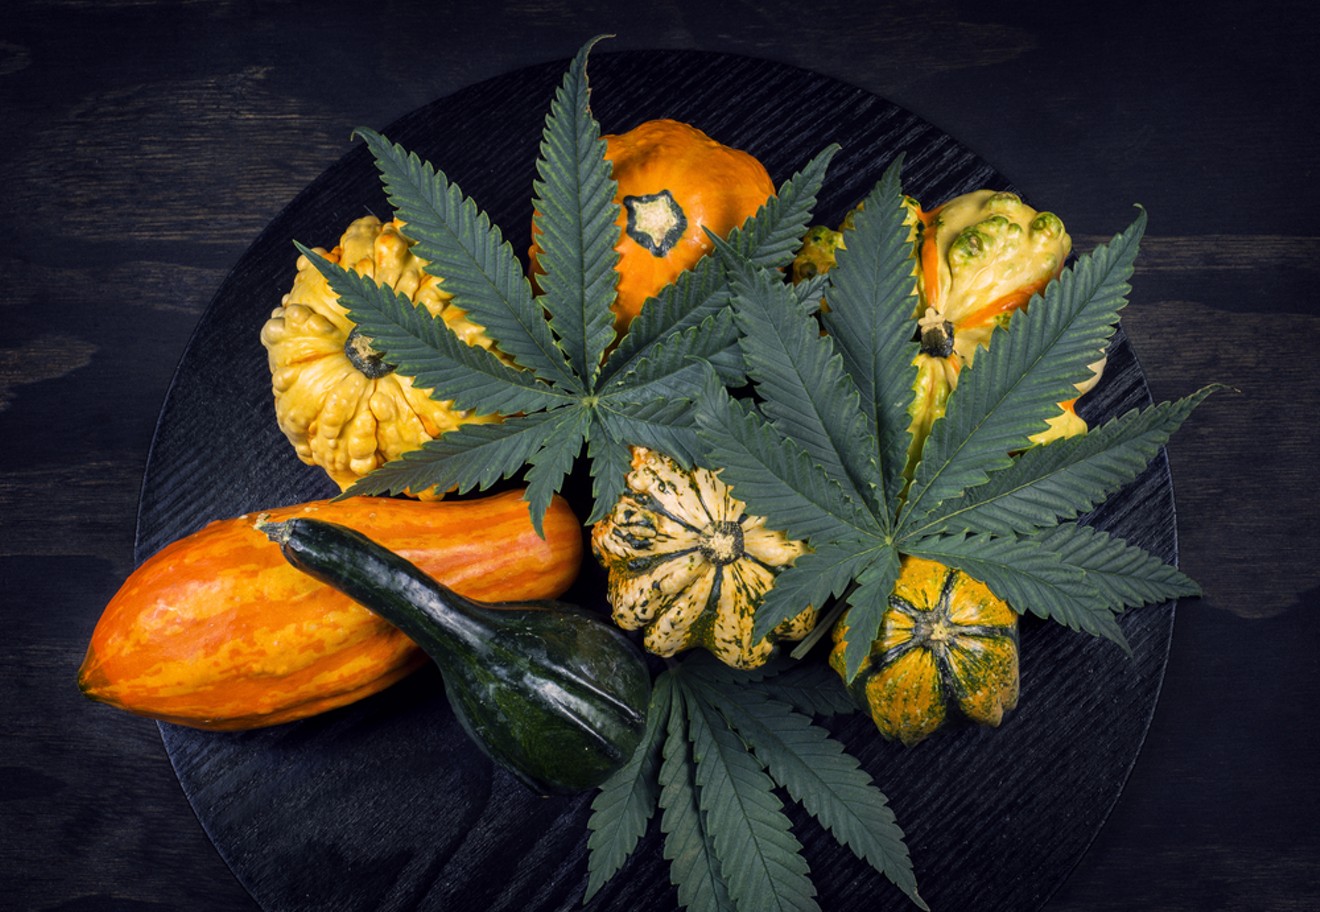 Celebrate another feast at Danksgiving on November 30.